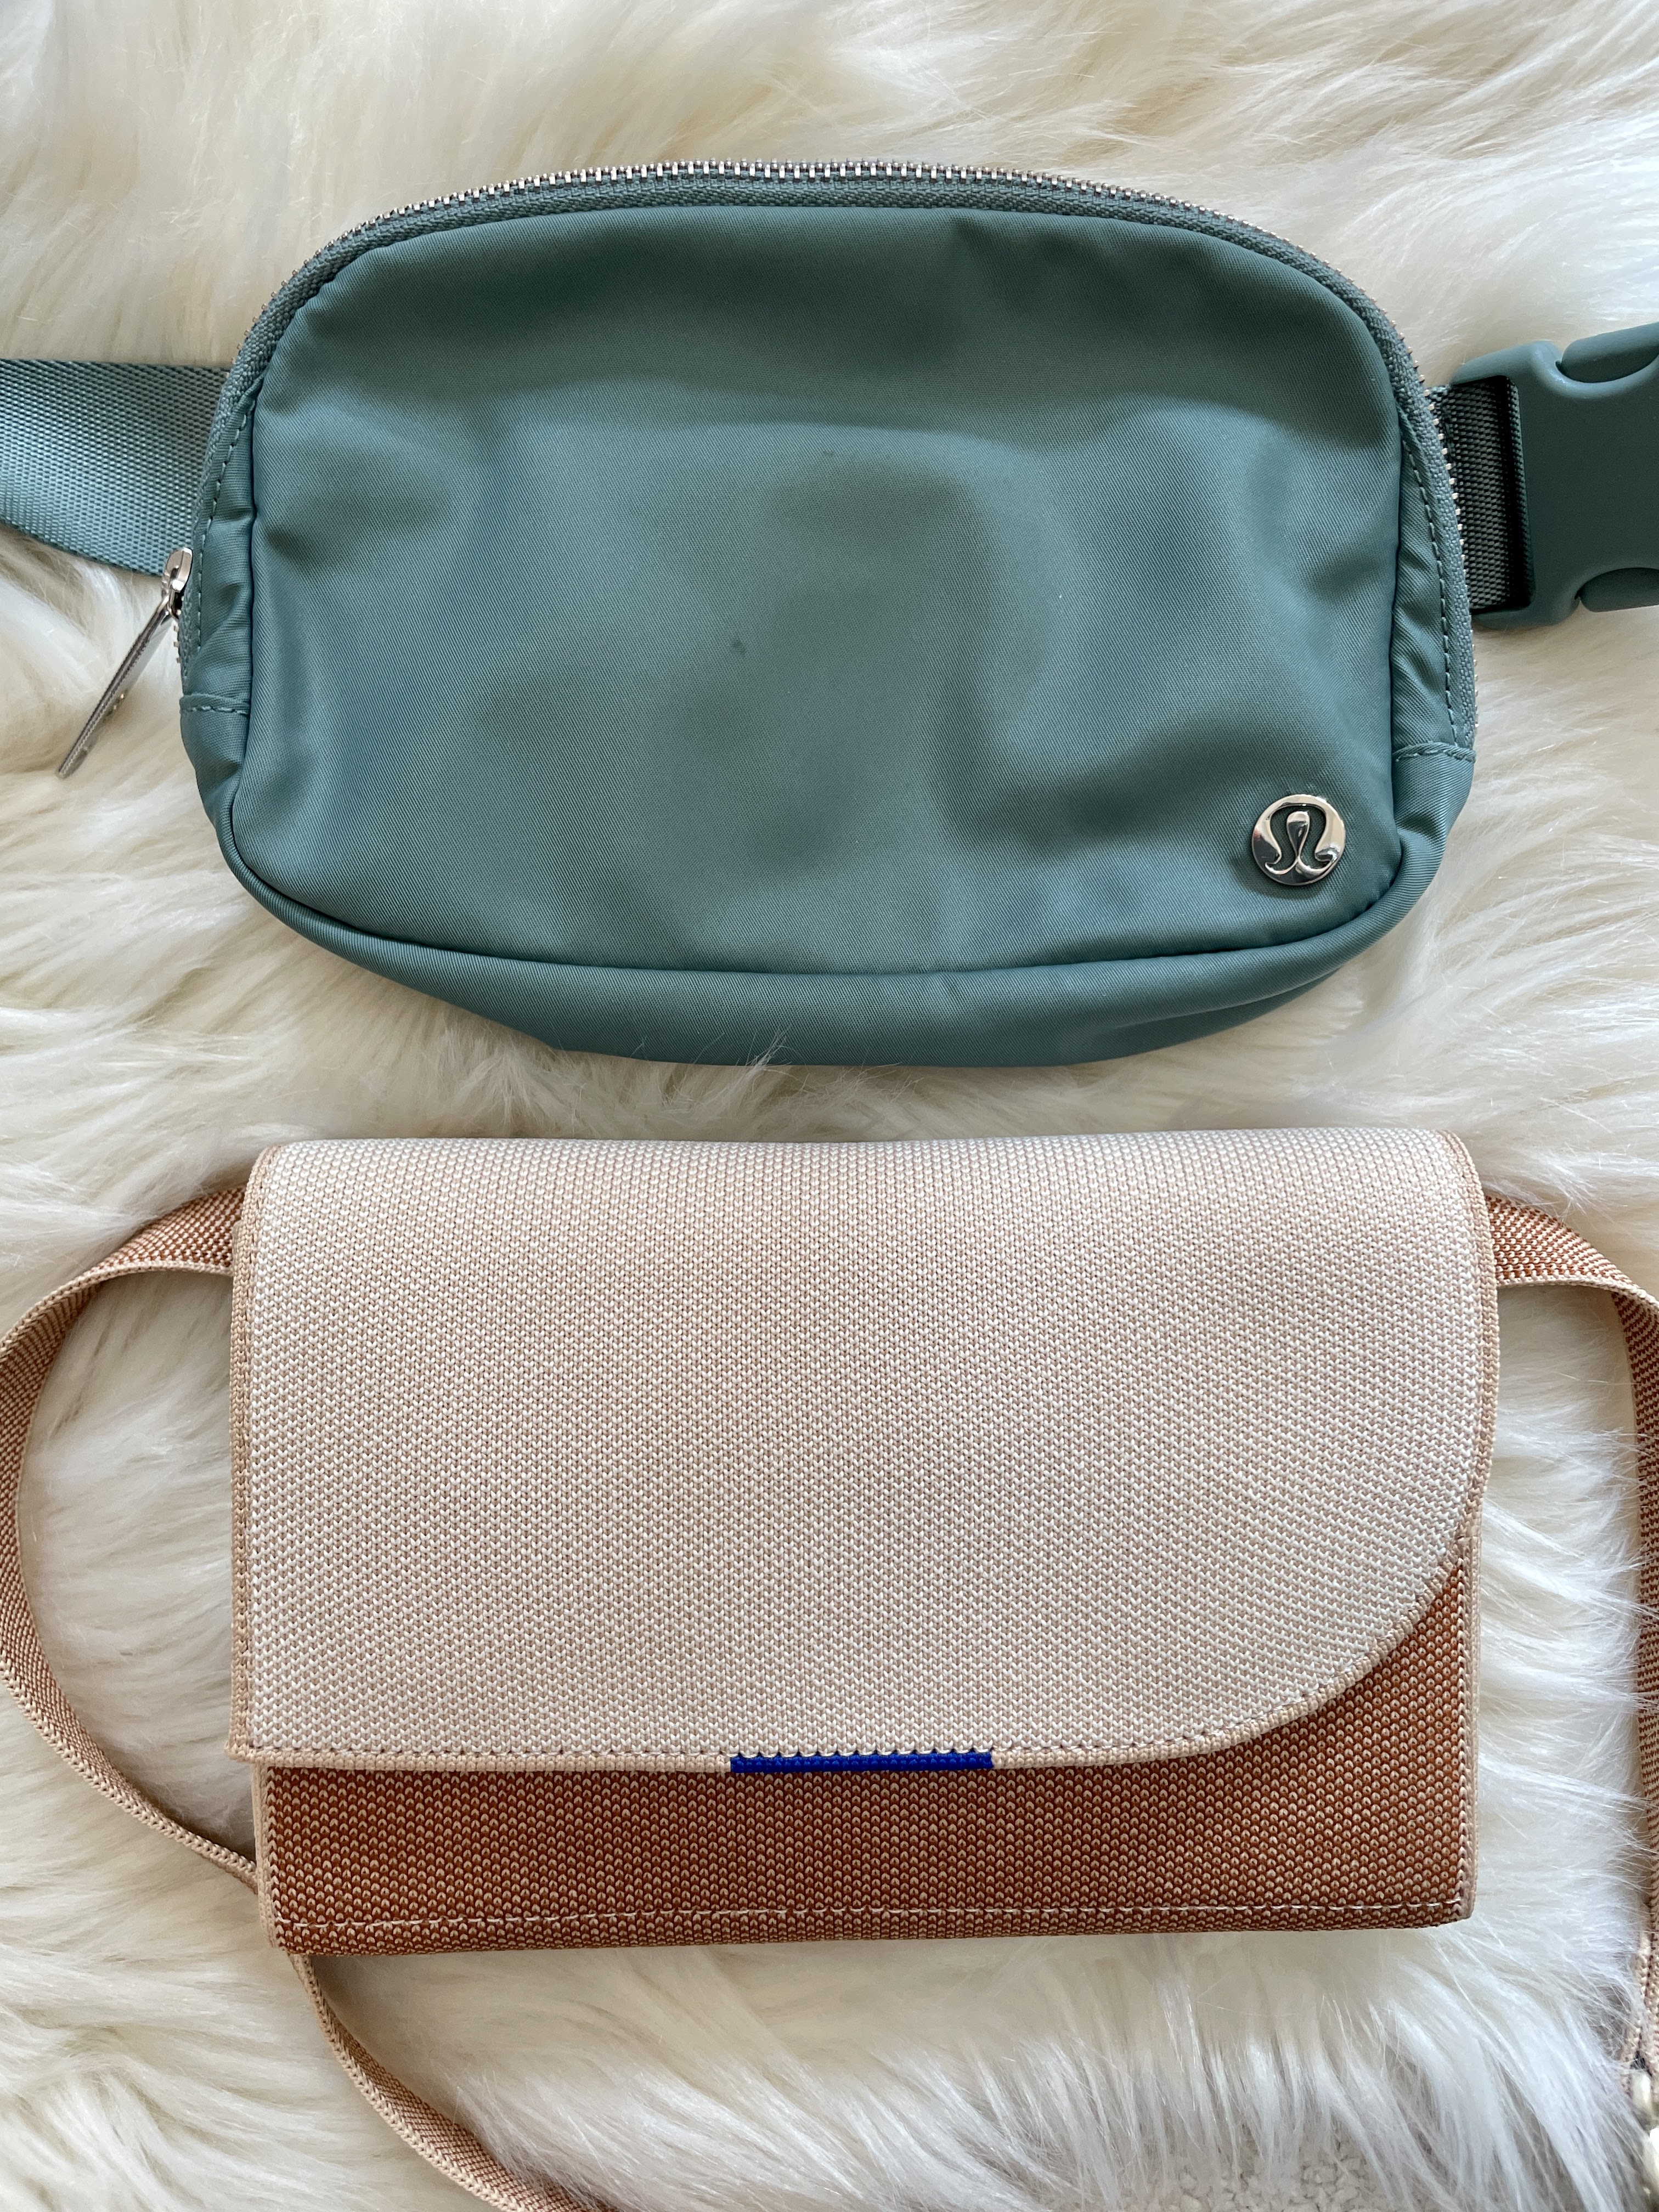 Rothy's - The Belt Bag in Blue/Neutral